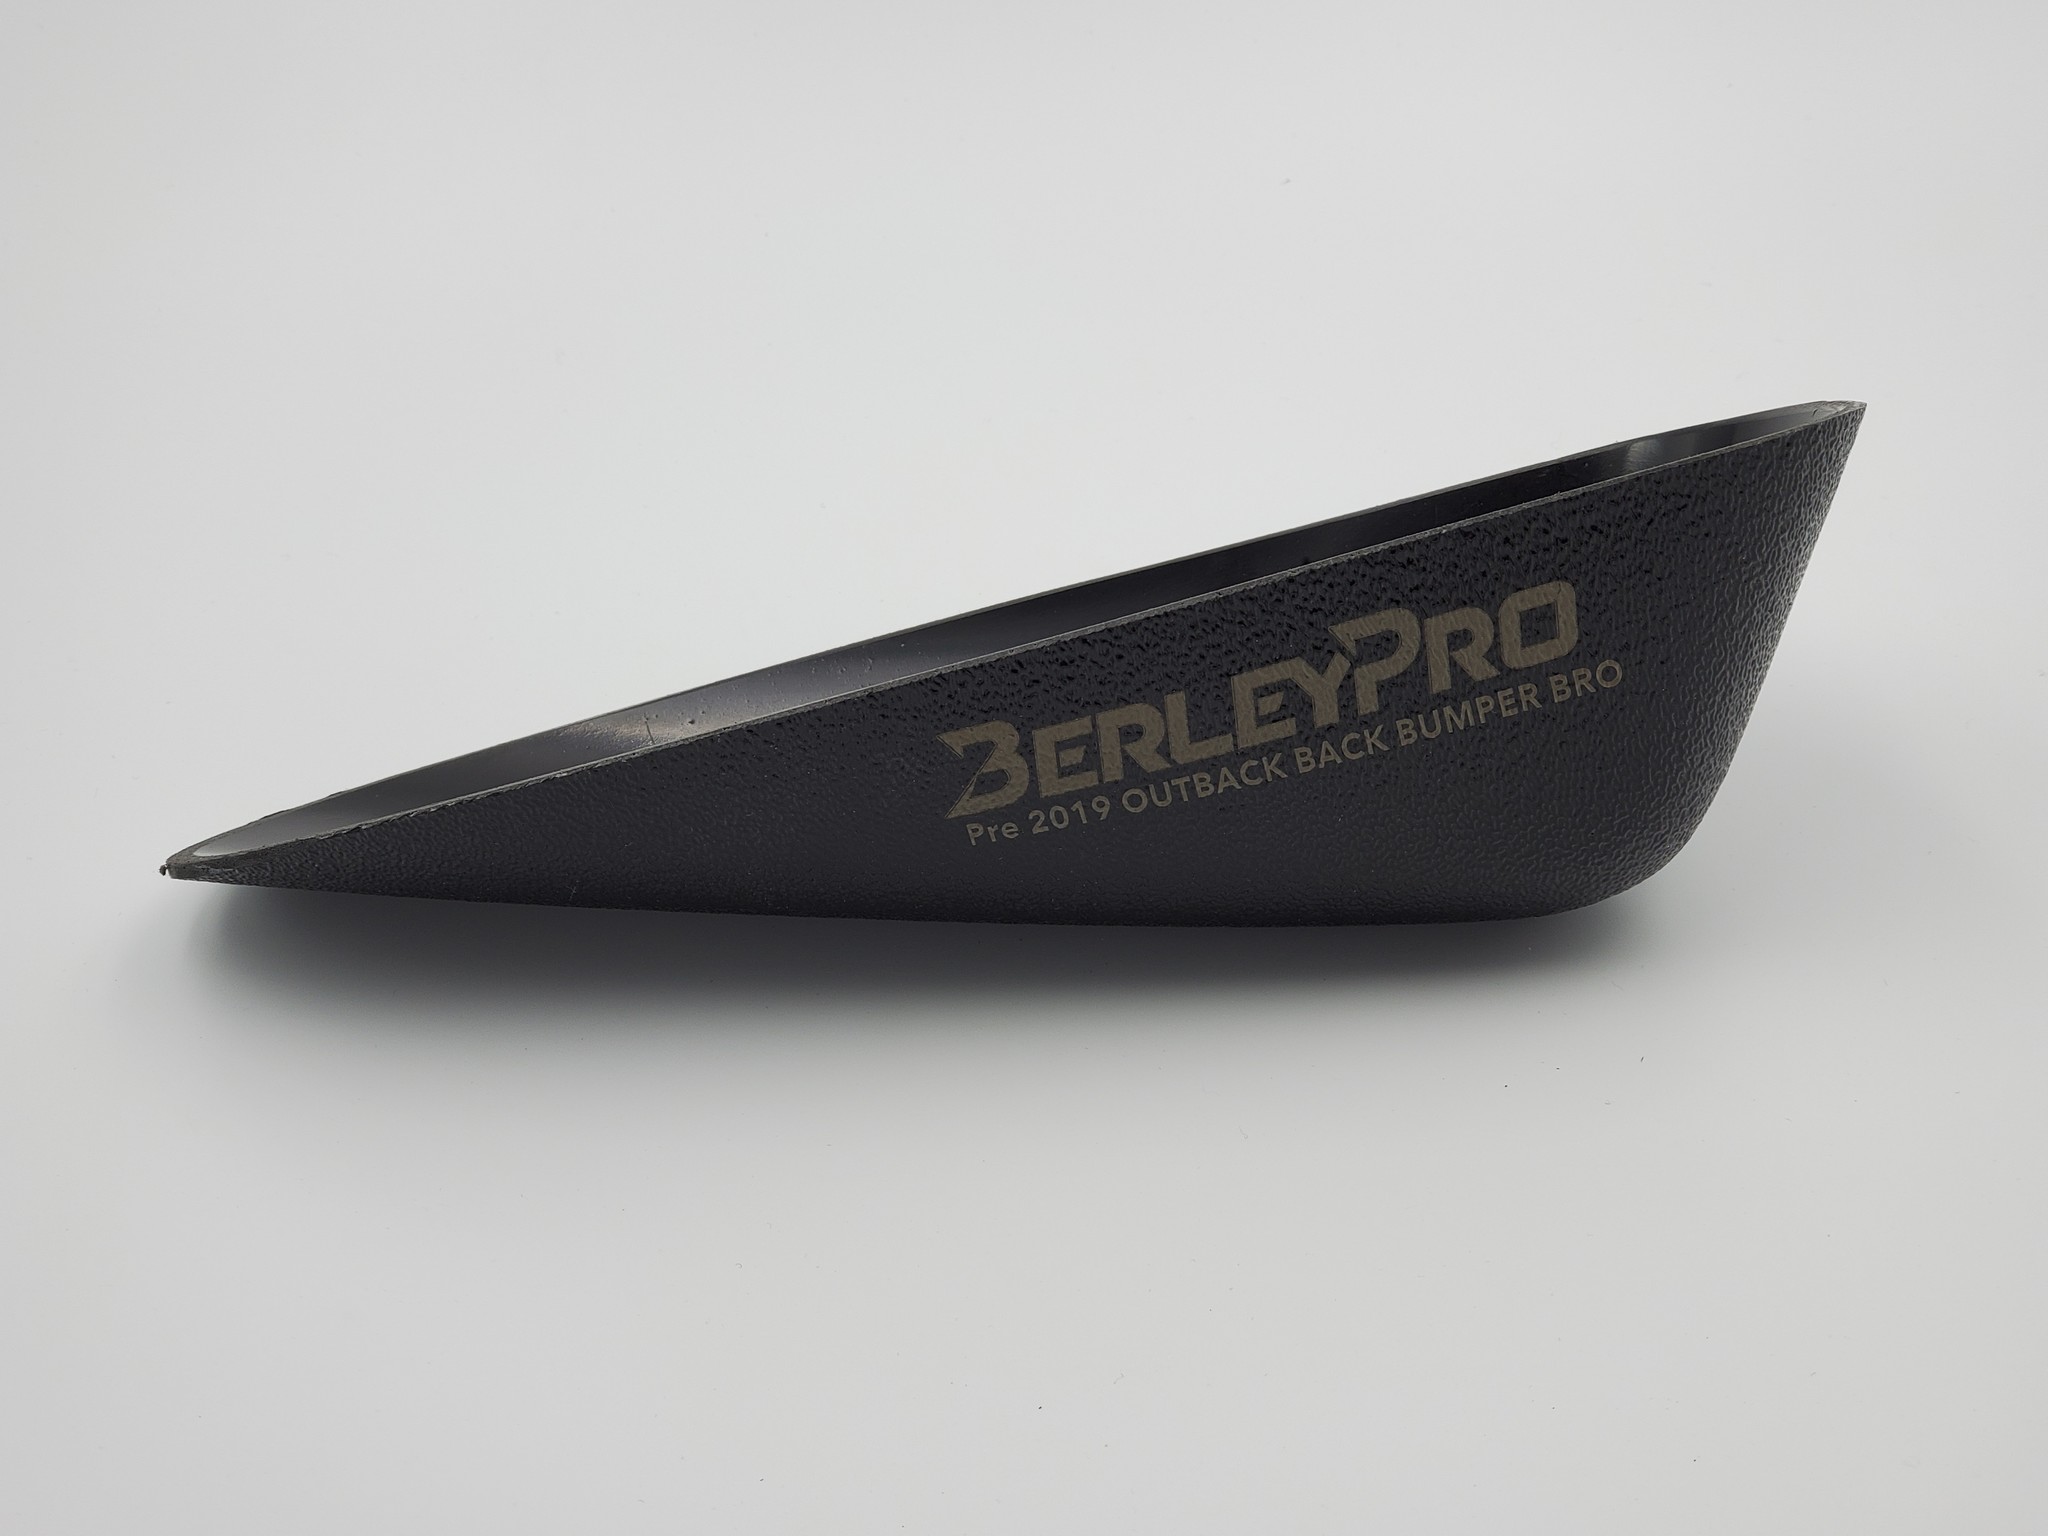 BerleyPro visors 💯 glare protection 🌞✓ spray protection 💦✓ run cooler,  use less battery 🥶🪫✓ * * #berleypro #fishing